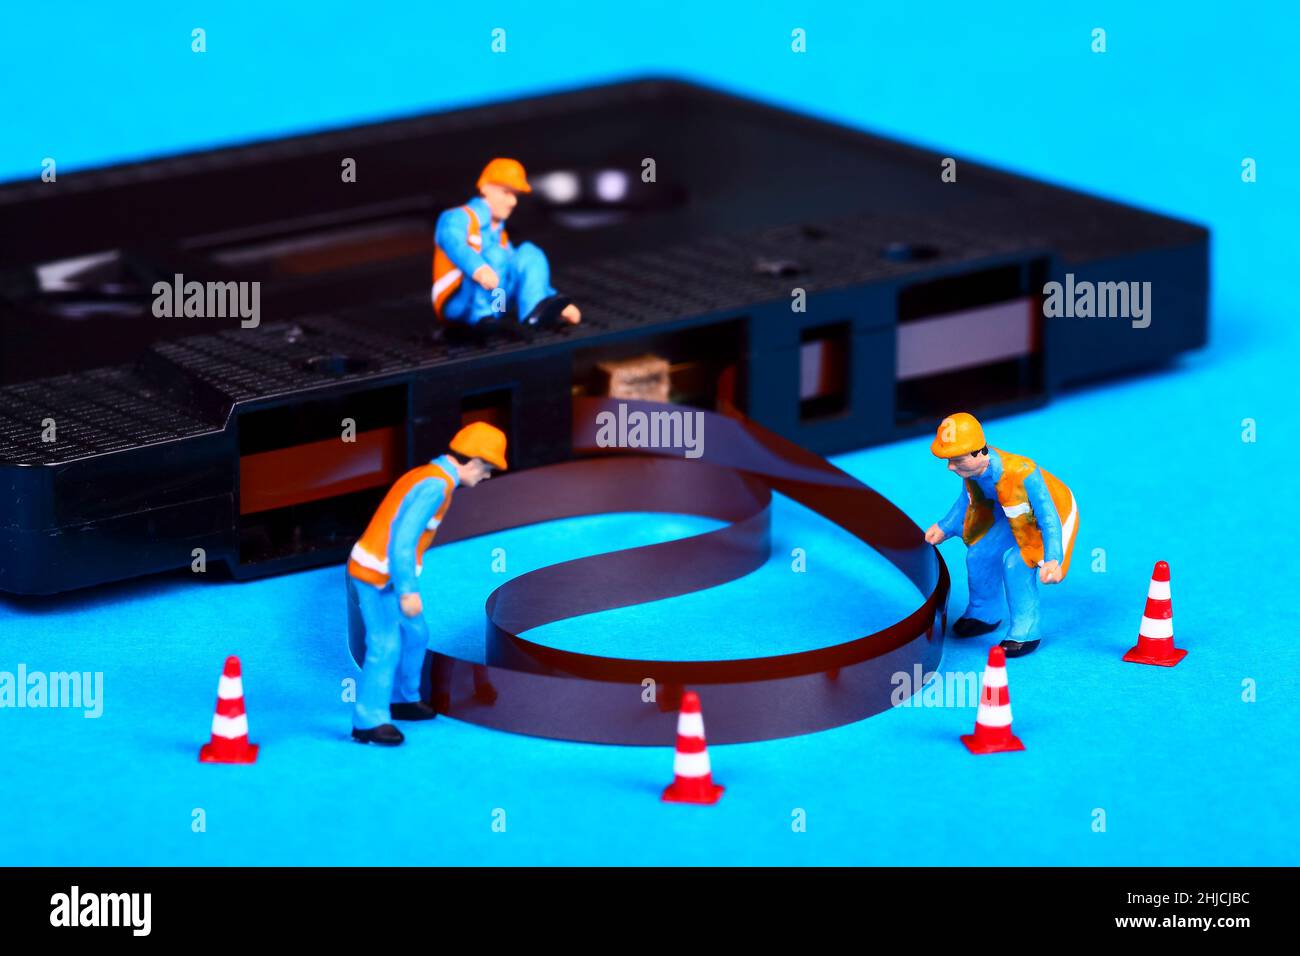 Conceptual image of miniature figure workmen inspecting an old vintage retro cassette tape that has unravelled after a tape jam Stock Photo